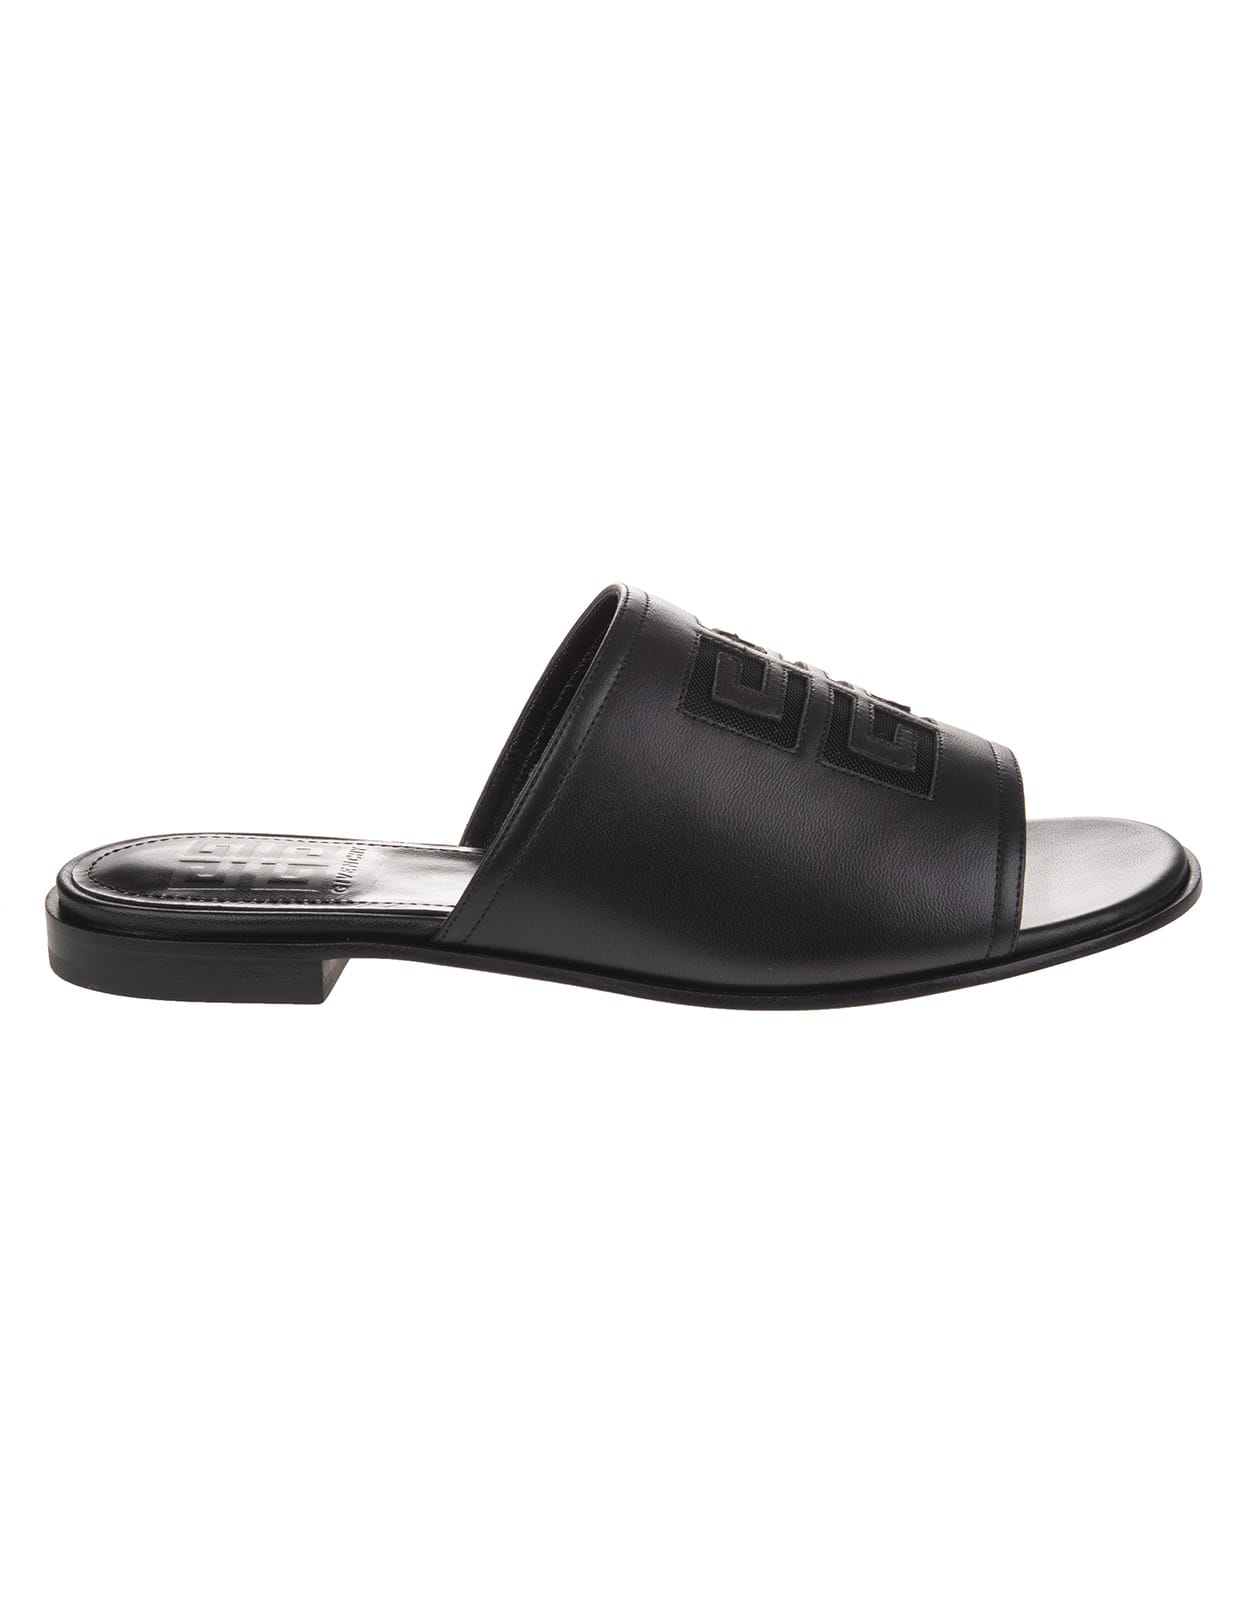 Buy Givenchy Woman 4g Flat Mule In Black Leather online, shop Givenchy shoes with free shipping